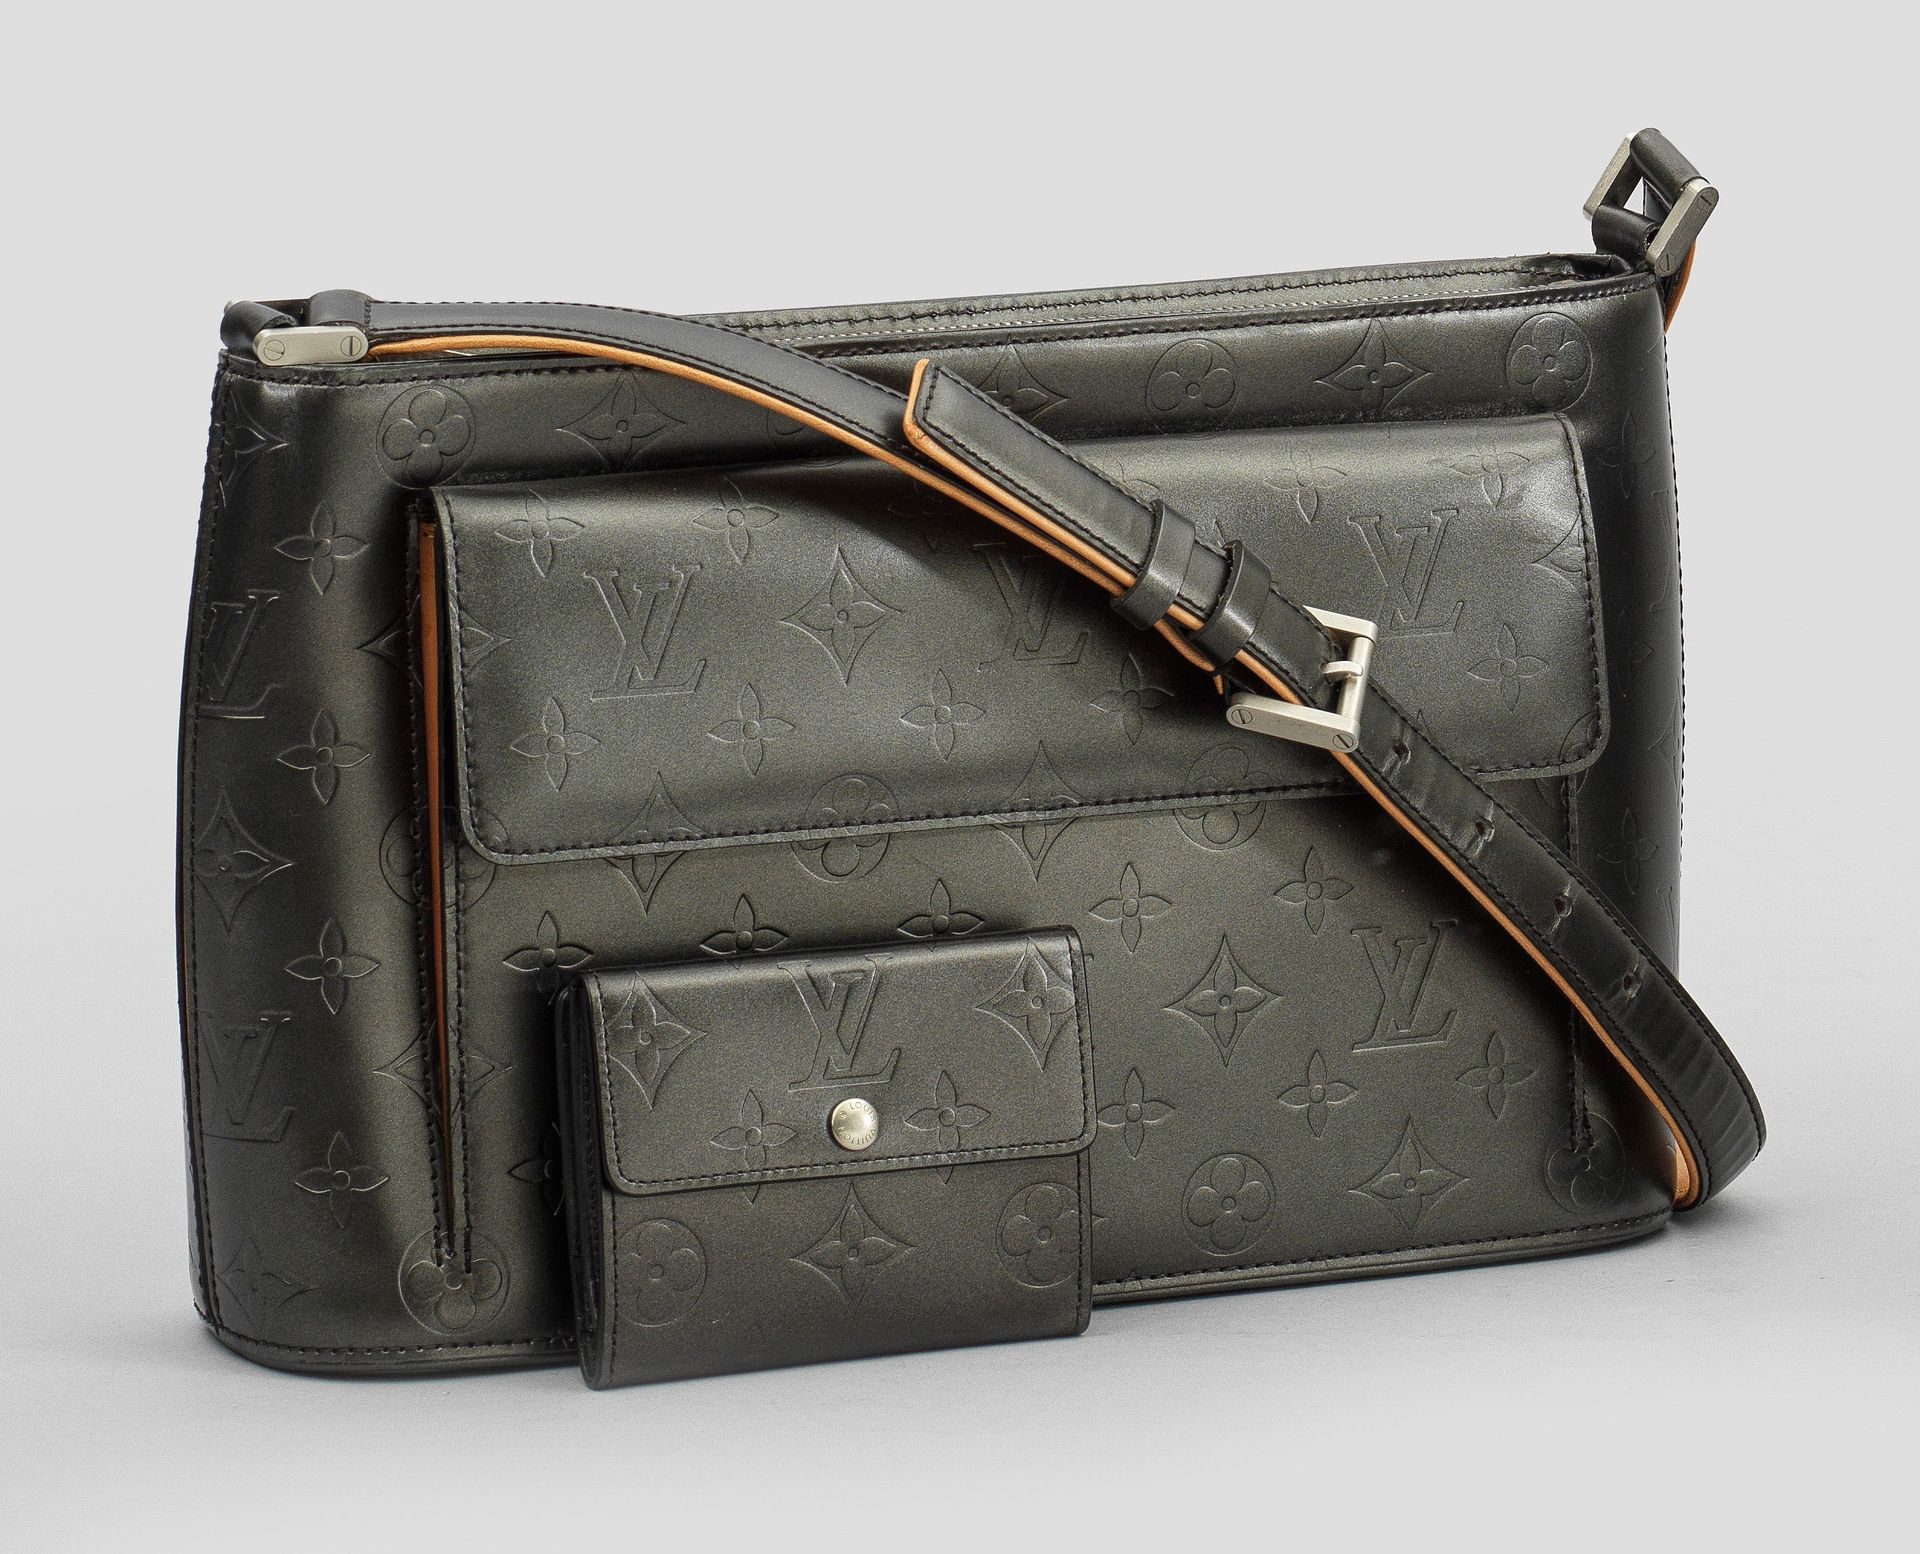 Null "Alston Bag" by LOUIS VUITTON with Monogram Vernis Matte Grey wallet and na&hellip;